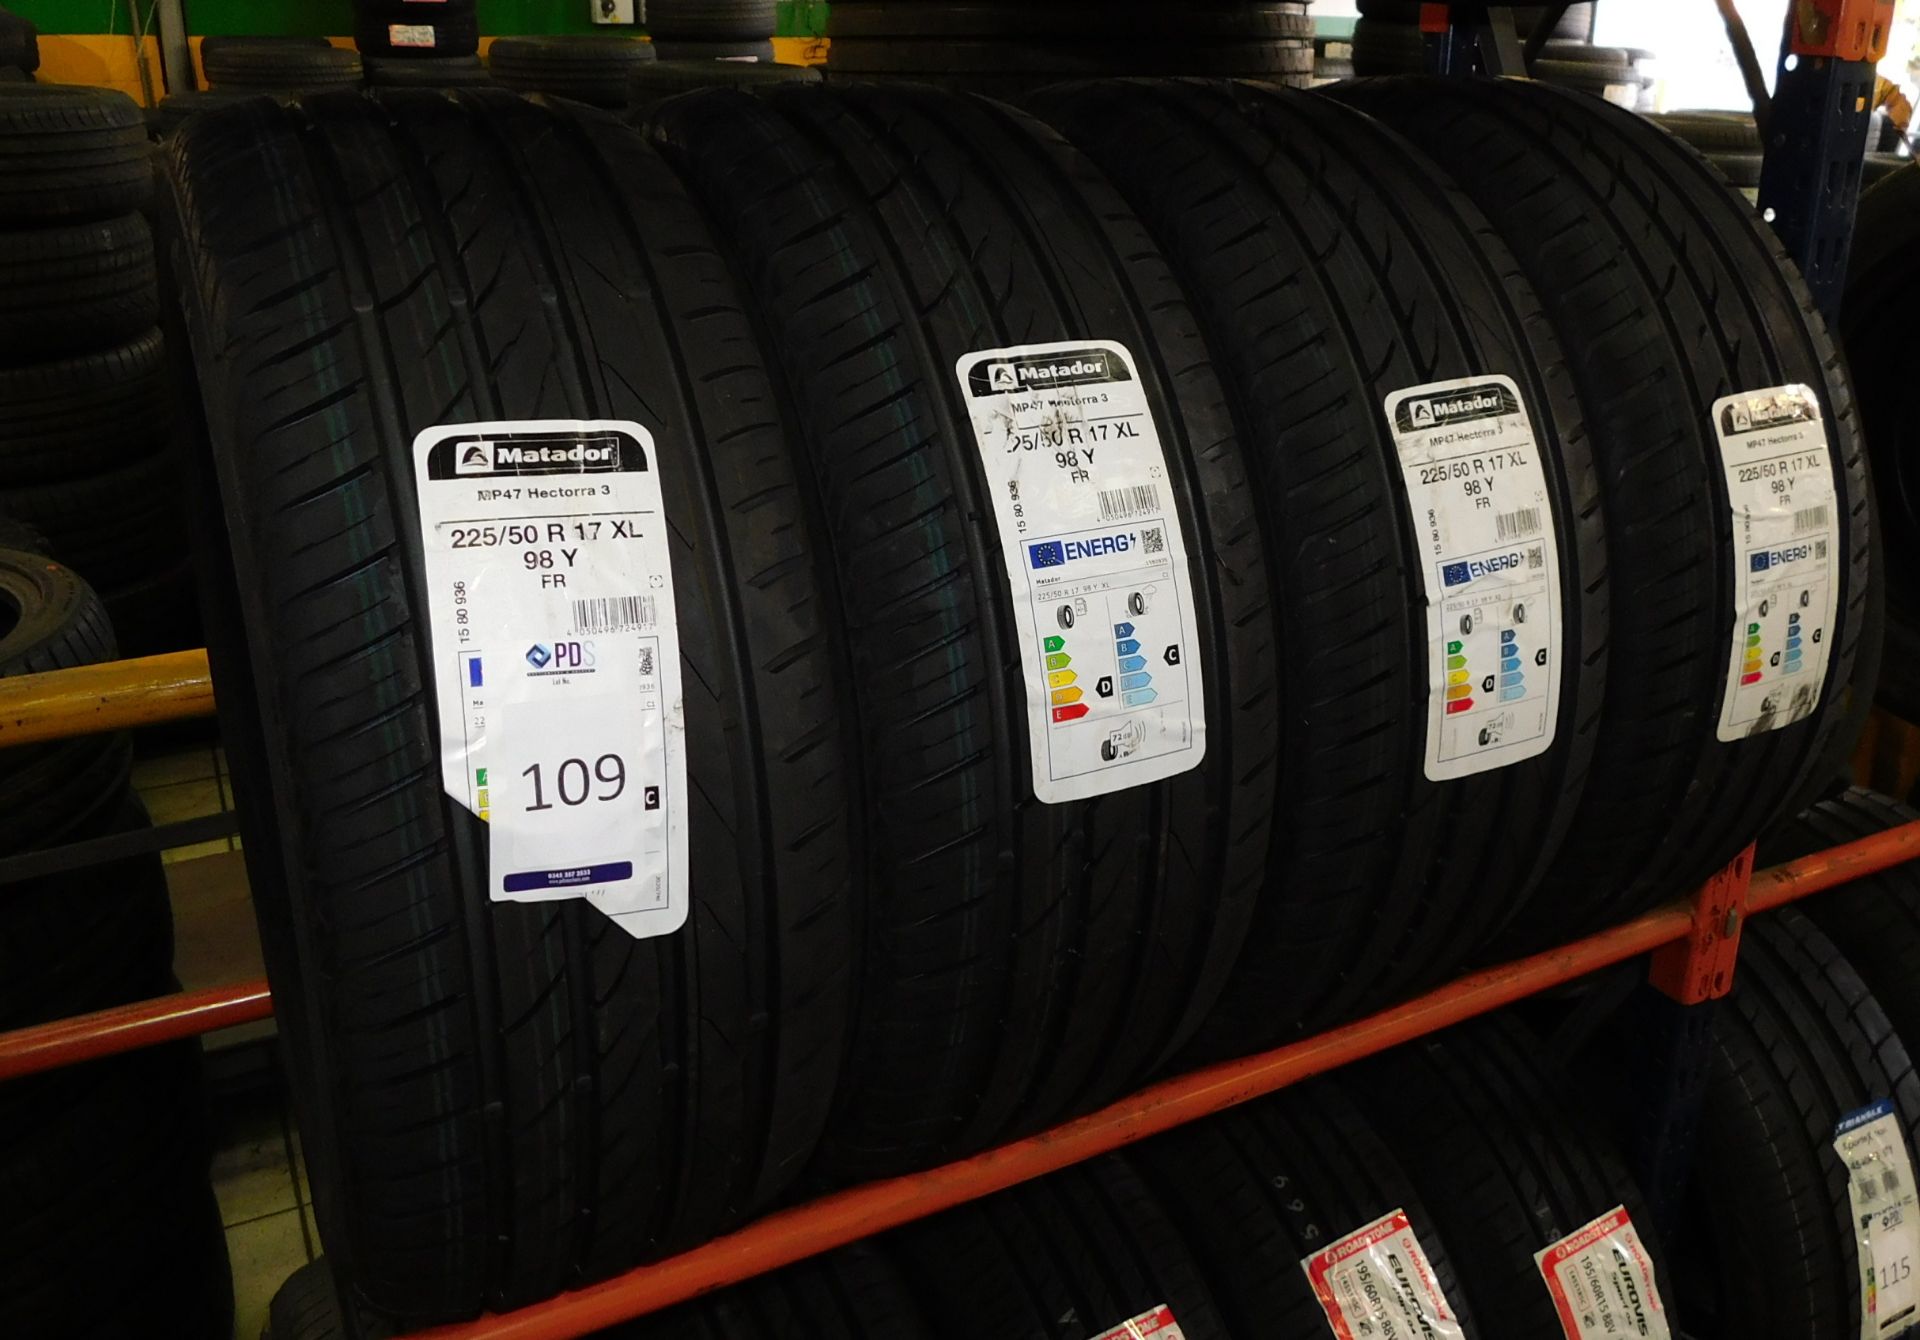 4 tyres, size 225/50 17 (Matador) (Location Northampton. Please Refer to General Notes)